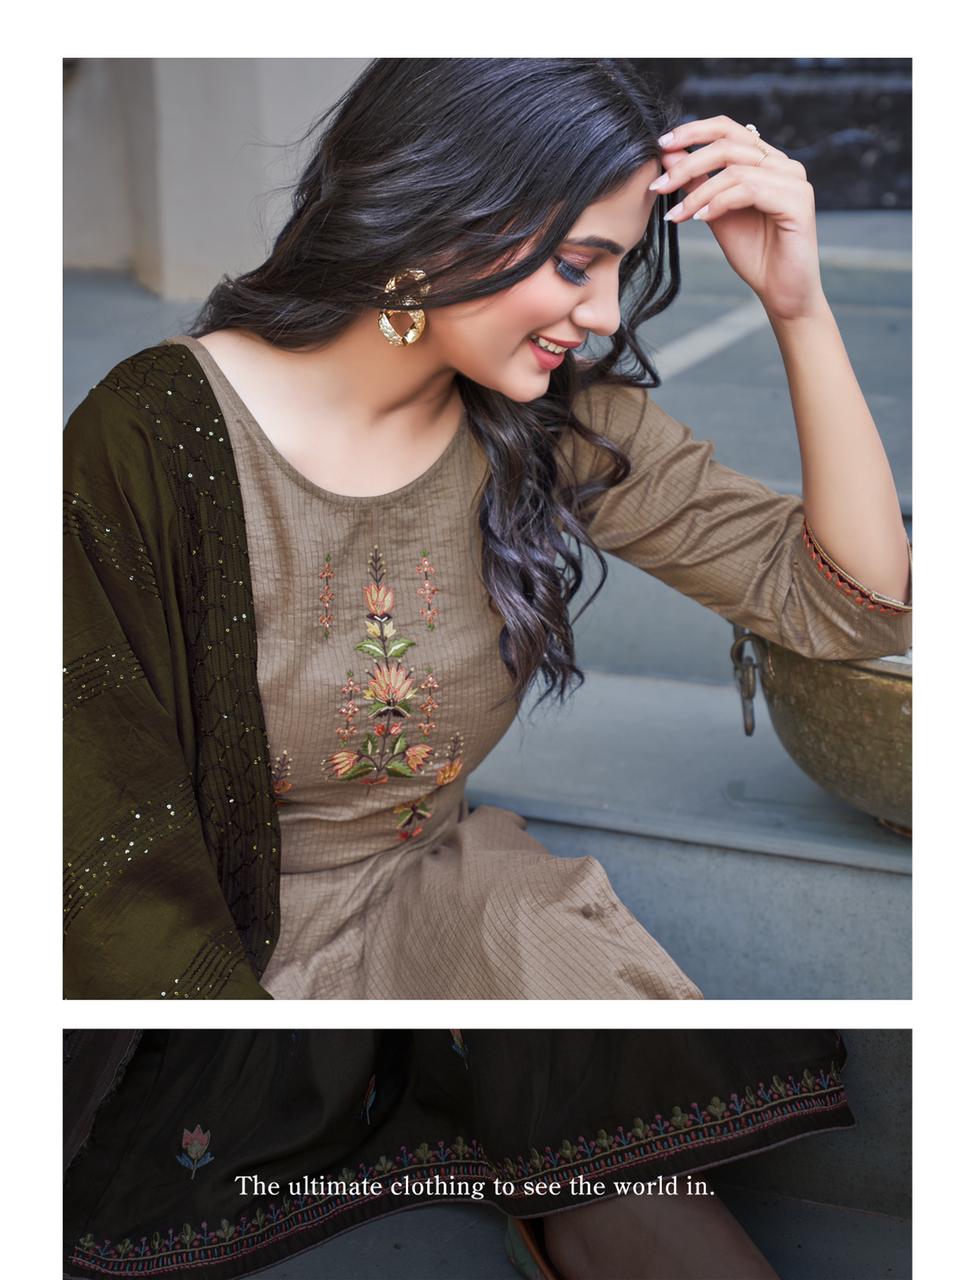 ladyview heer viscose new and modern style top with sharara and dupatta catalog